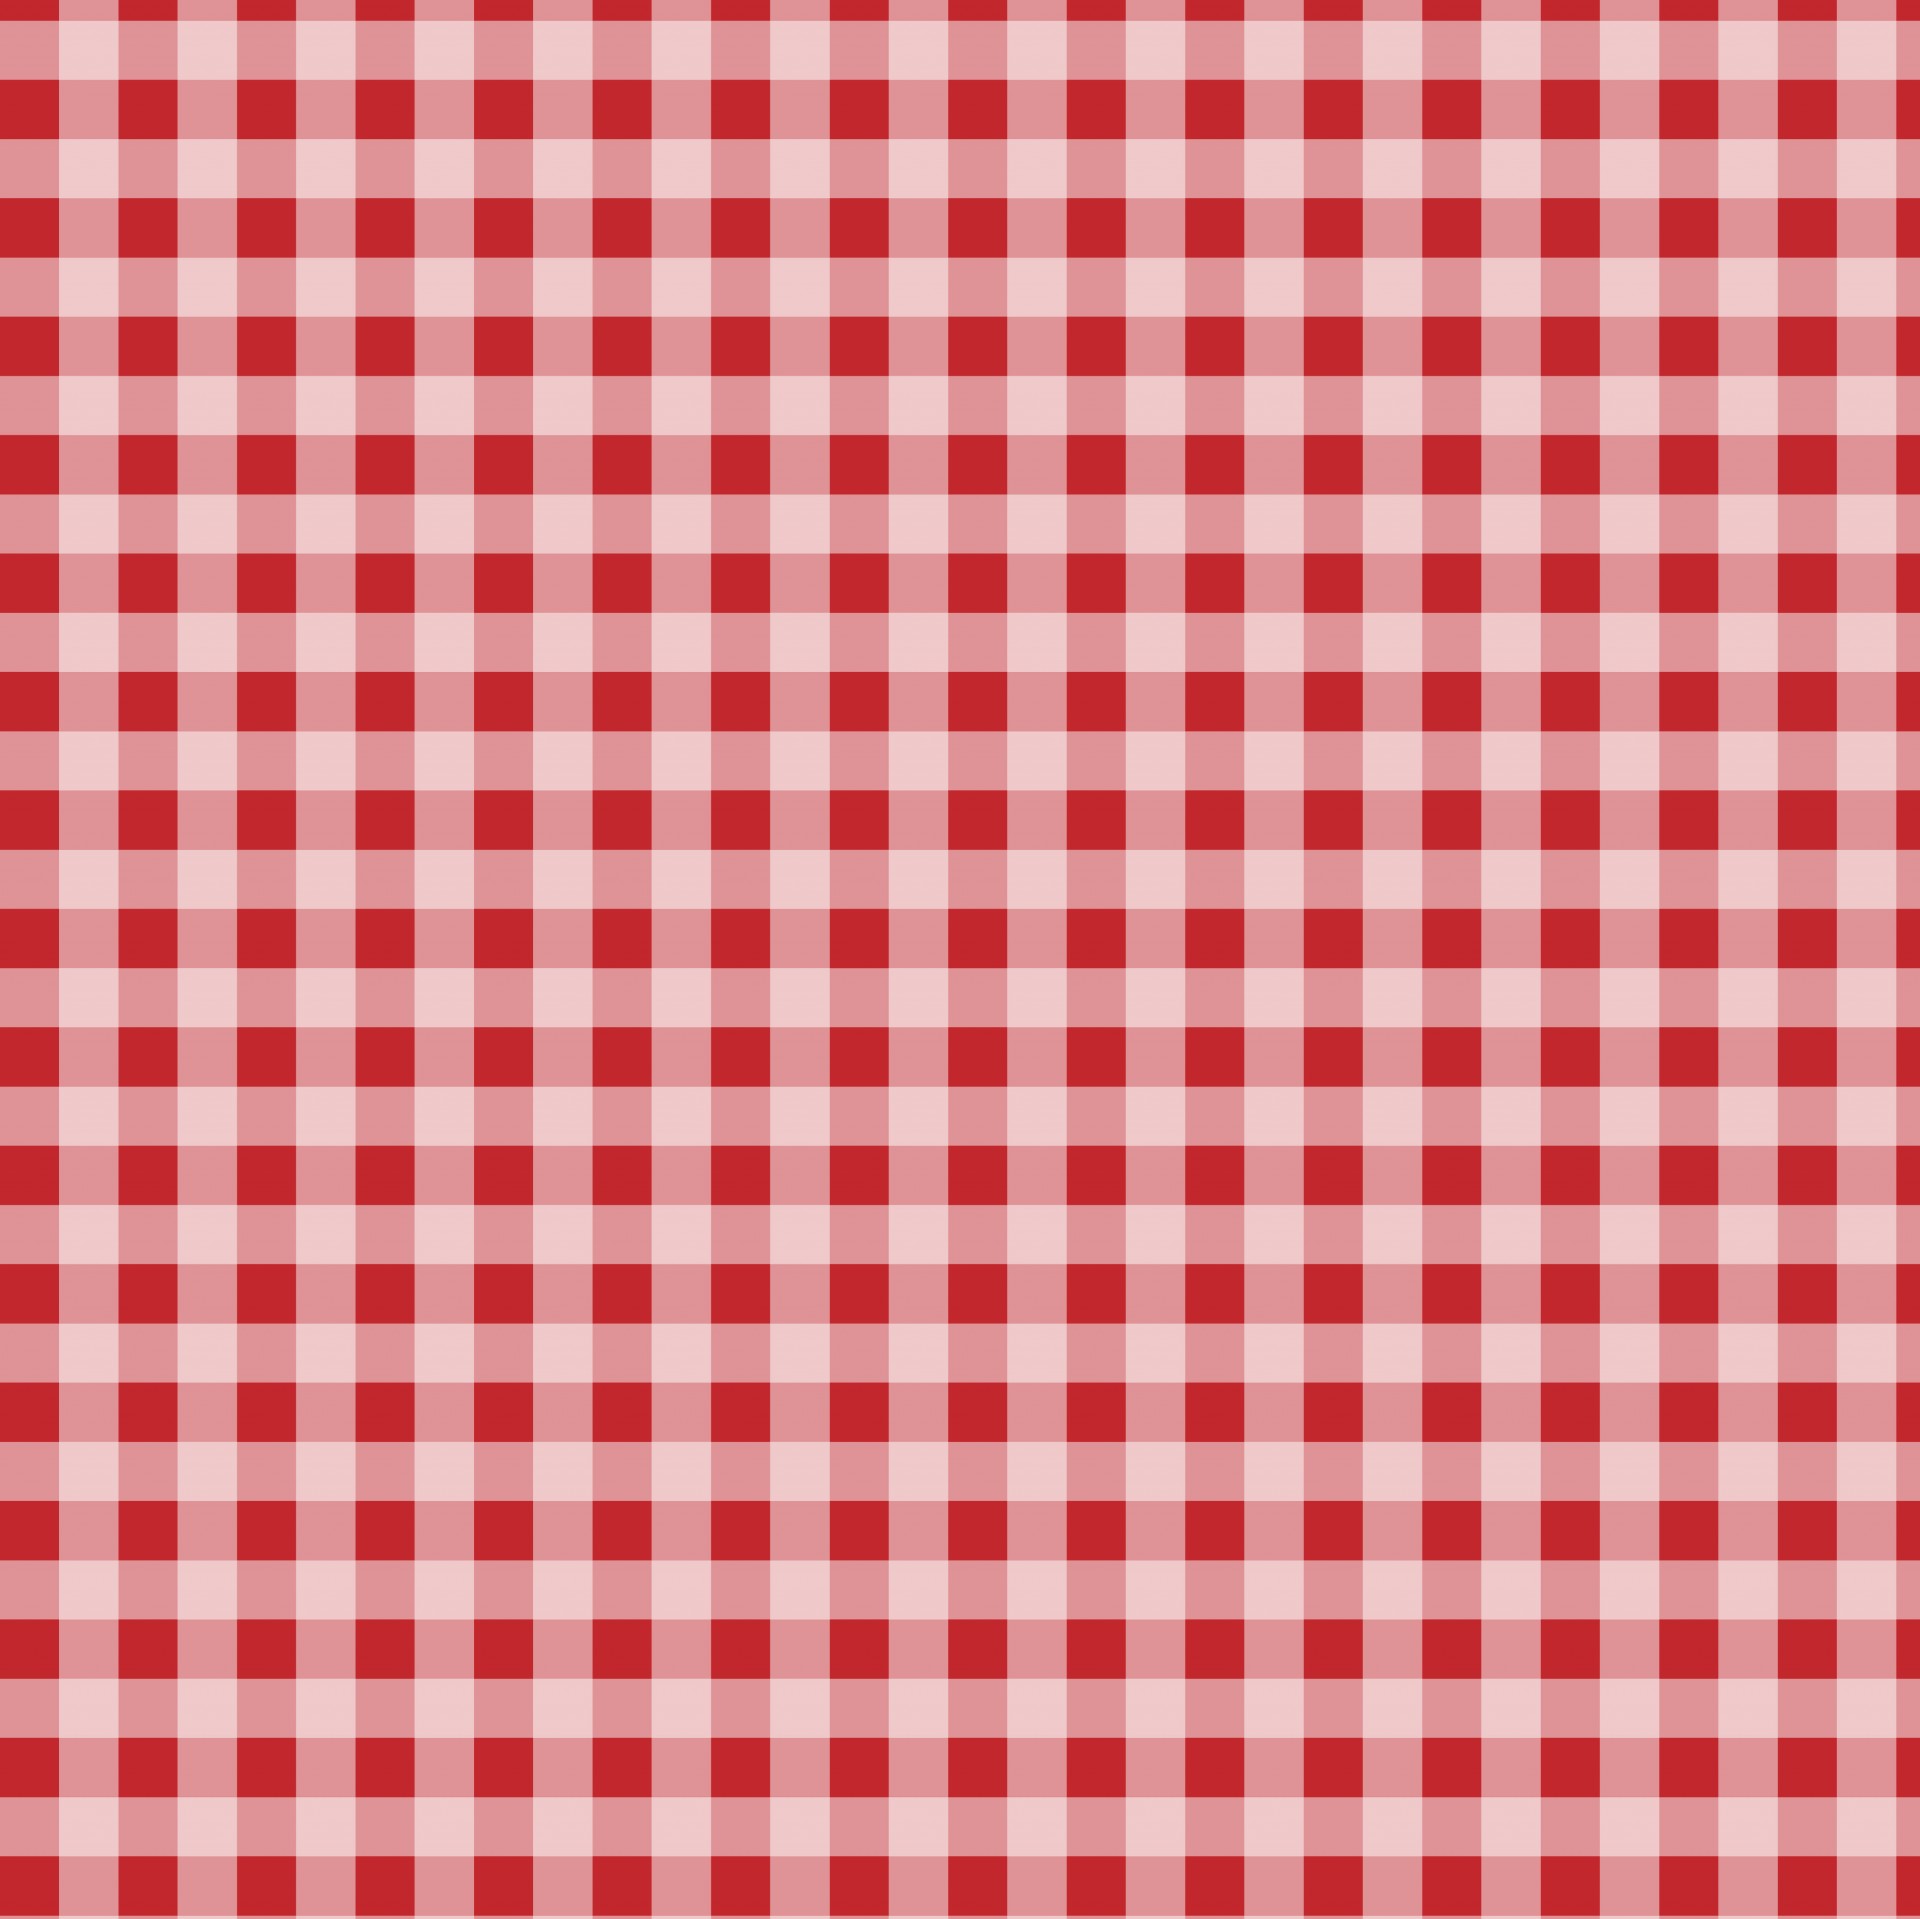 Checks Red Gingham Background Free Stock Photo Public HD Wallpapers Download Free Images Wallpaper [wallpaper981.blogspot.com]